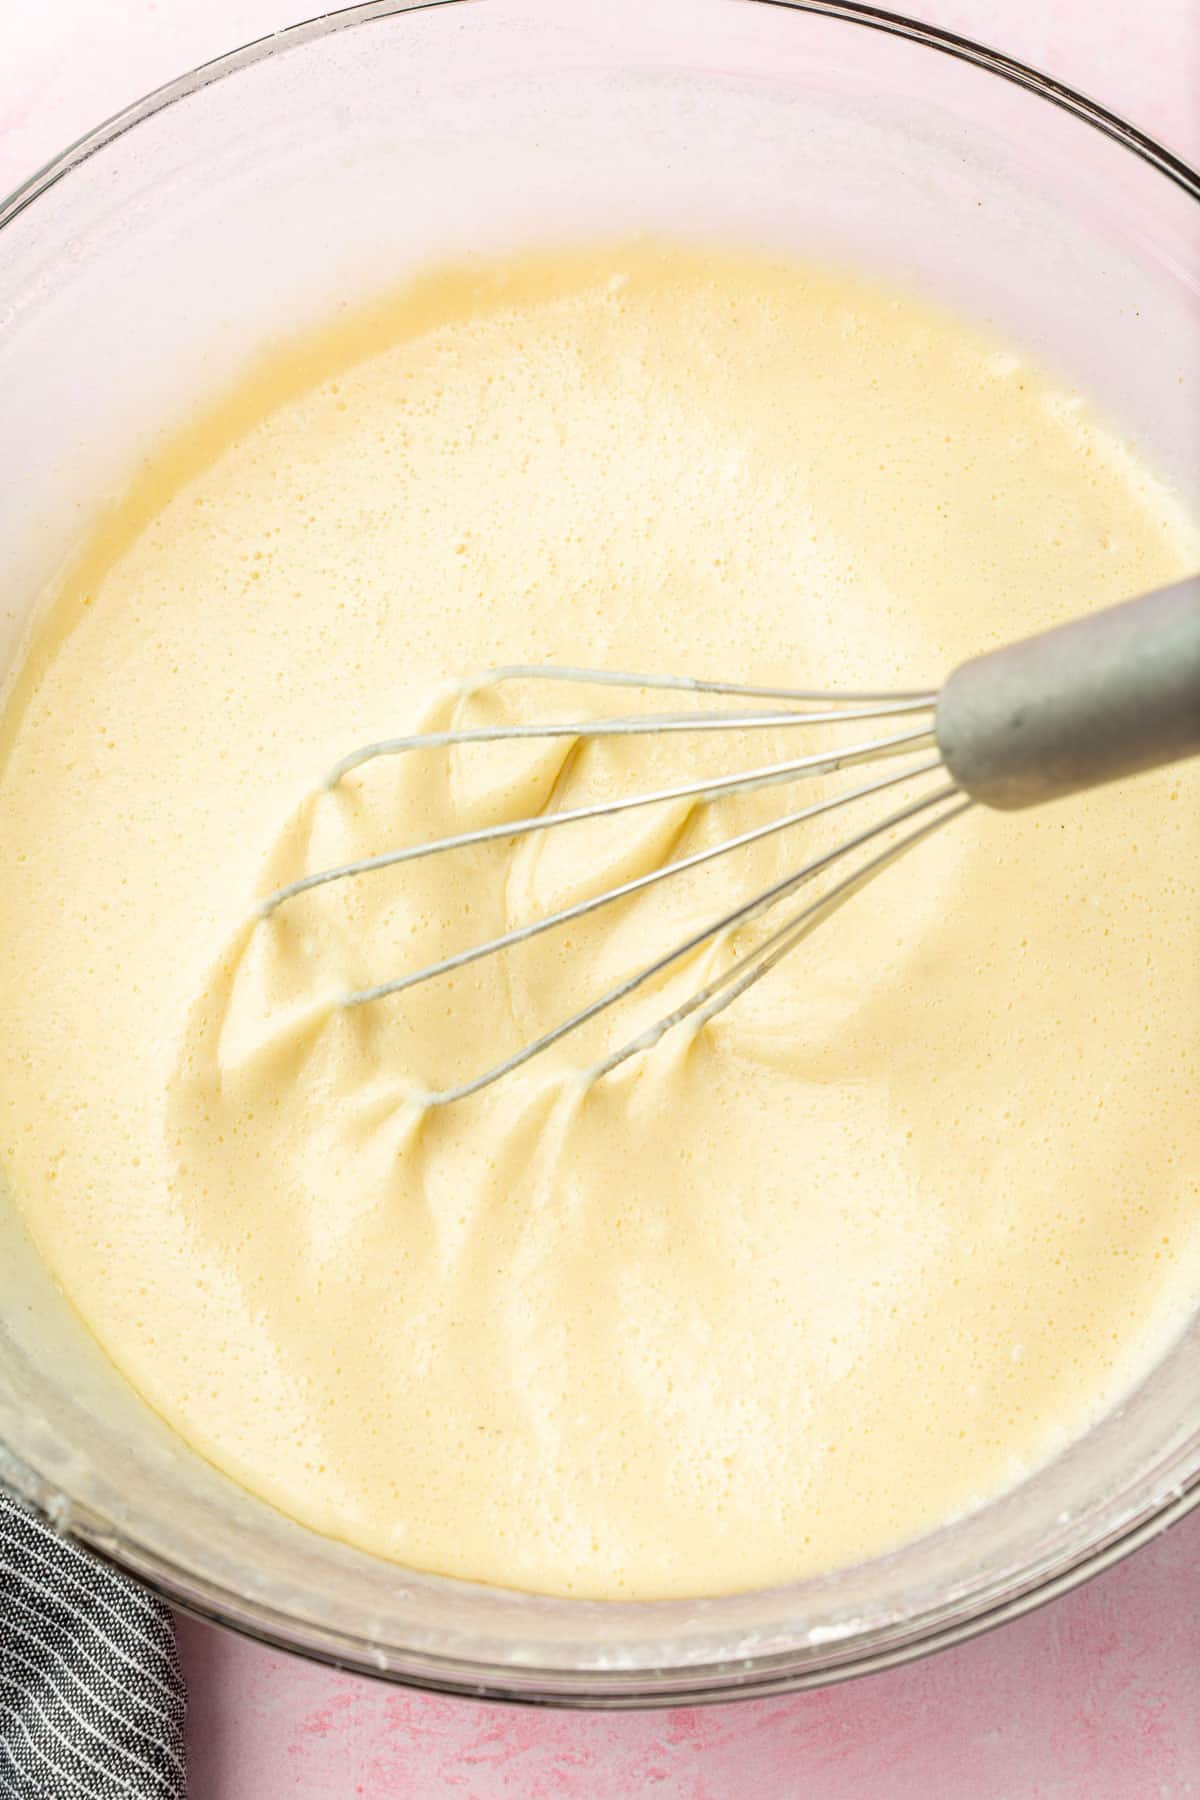 Gluten-free crepe batter being whisked in a large mixing bowl.